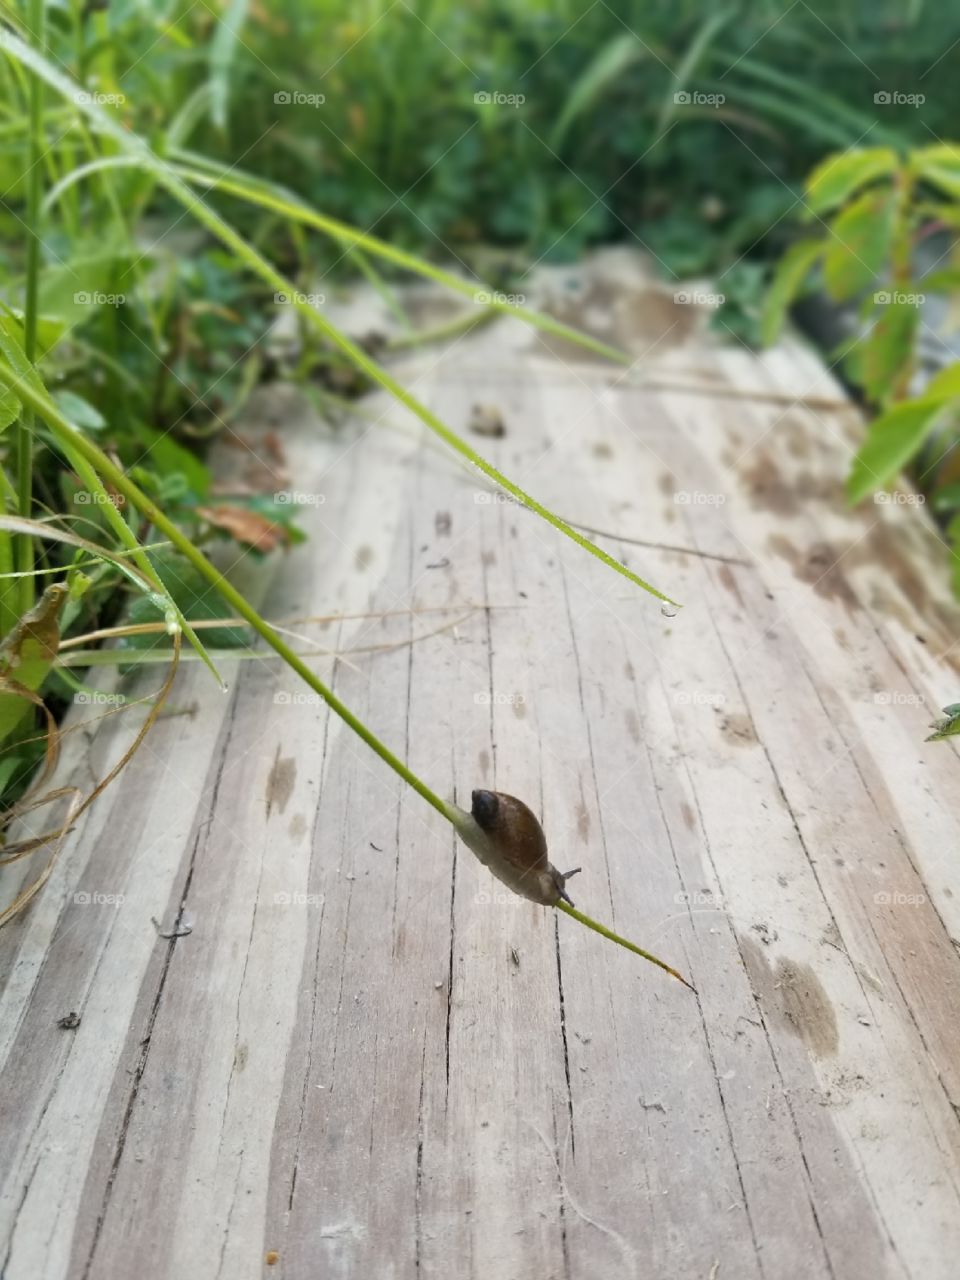 snail resting on a blade of grass